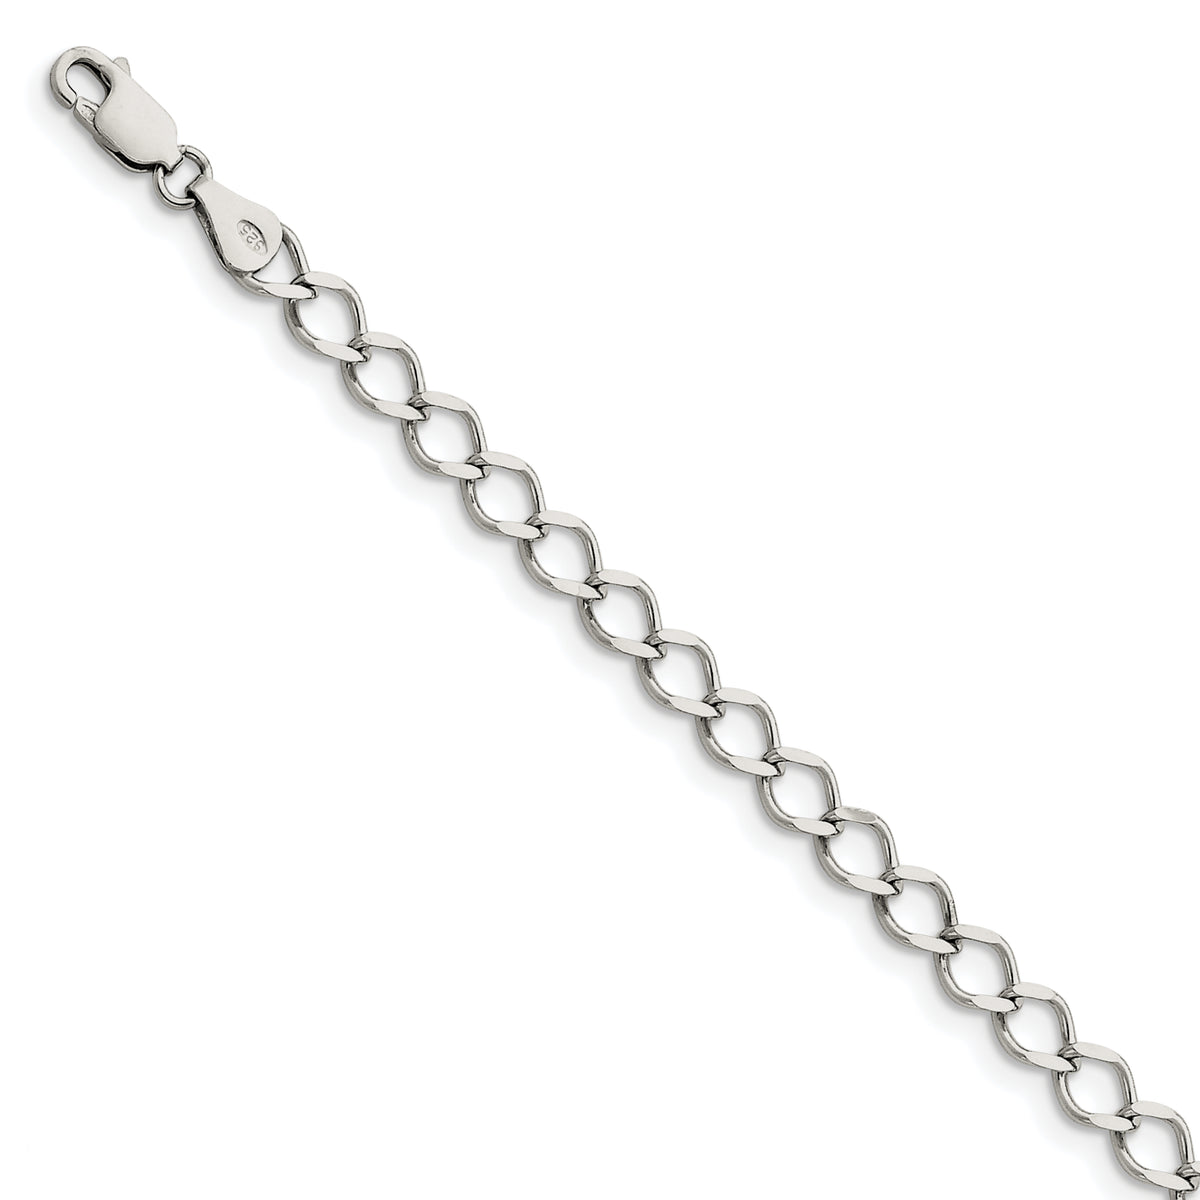 Sterling Silver 5.75mm Fancy Curb Chain